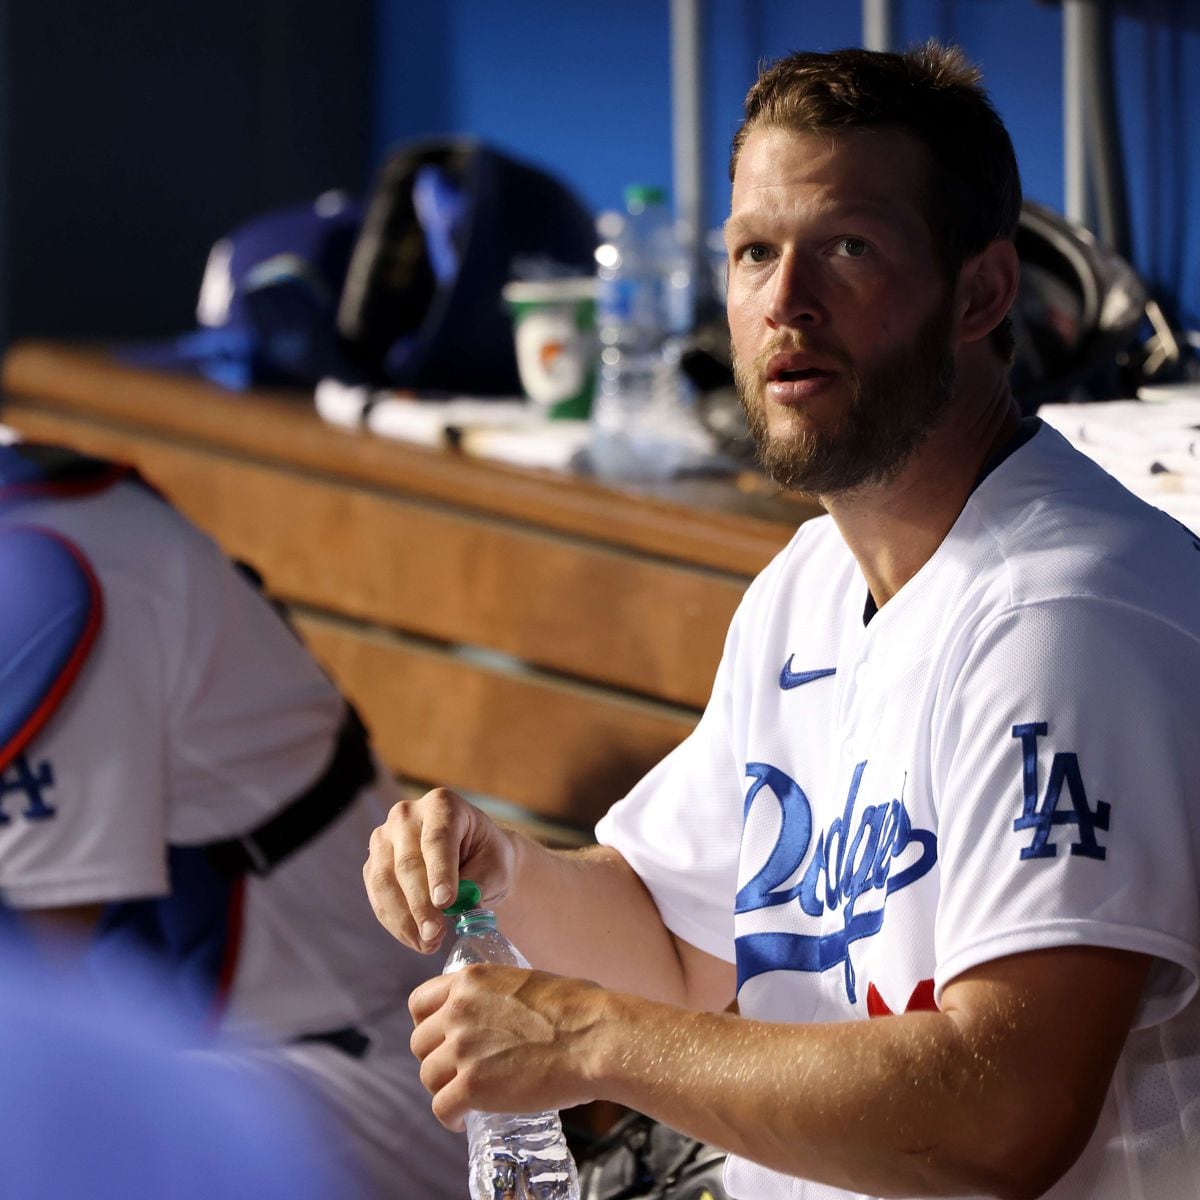 Clayton Kershaw looked good in his first rehab start with Rancho